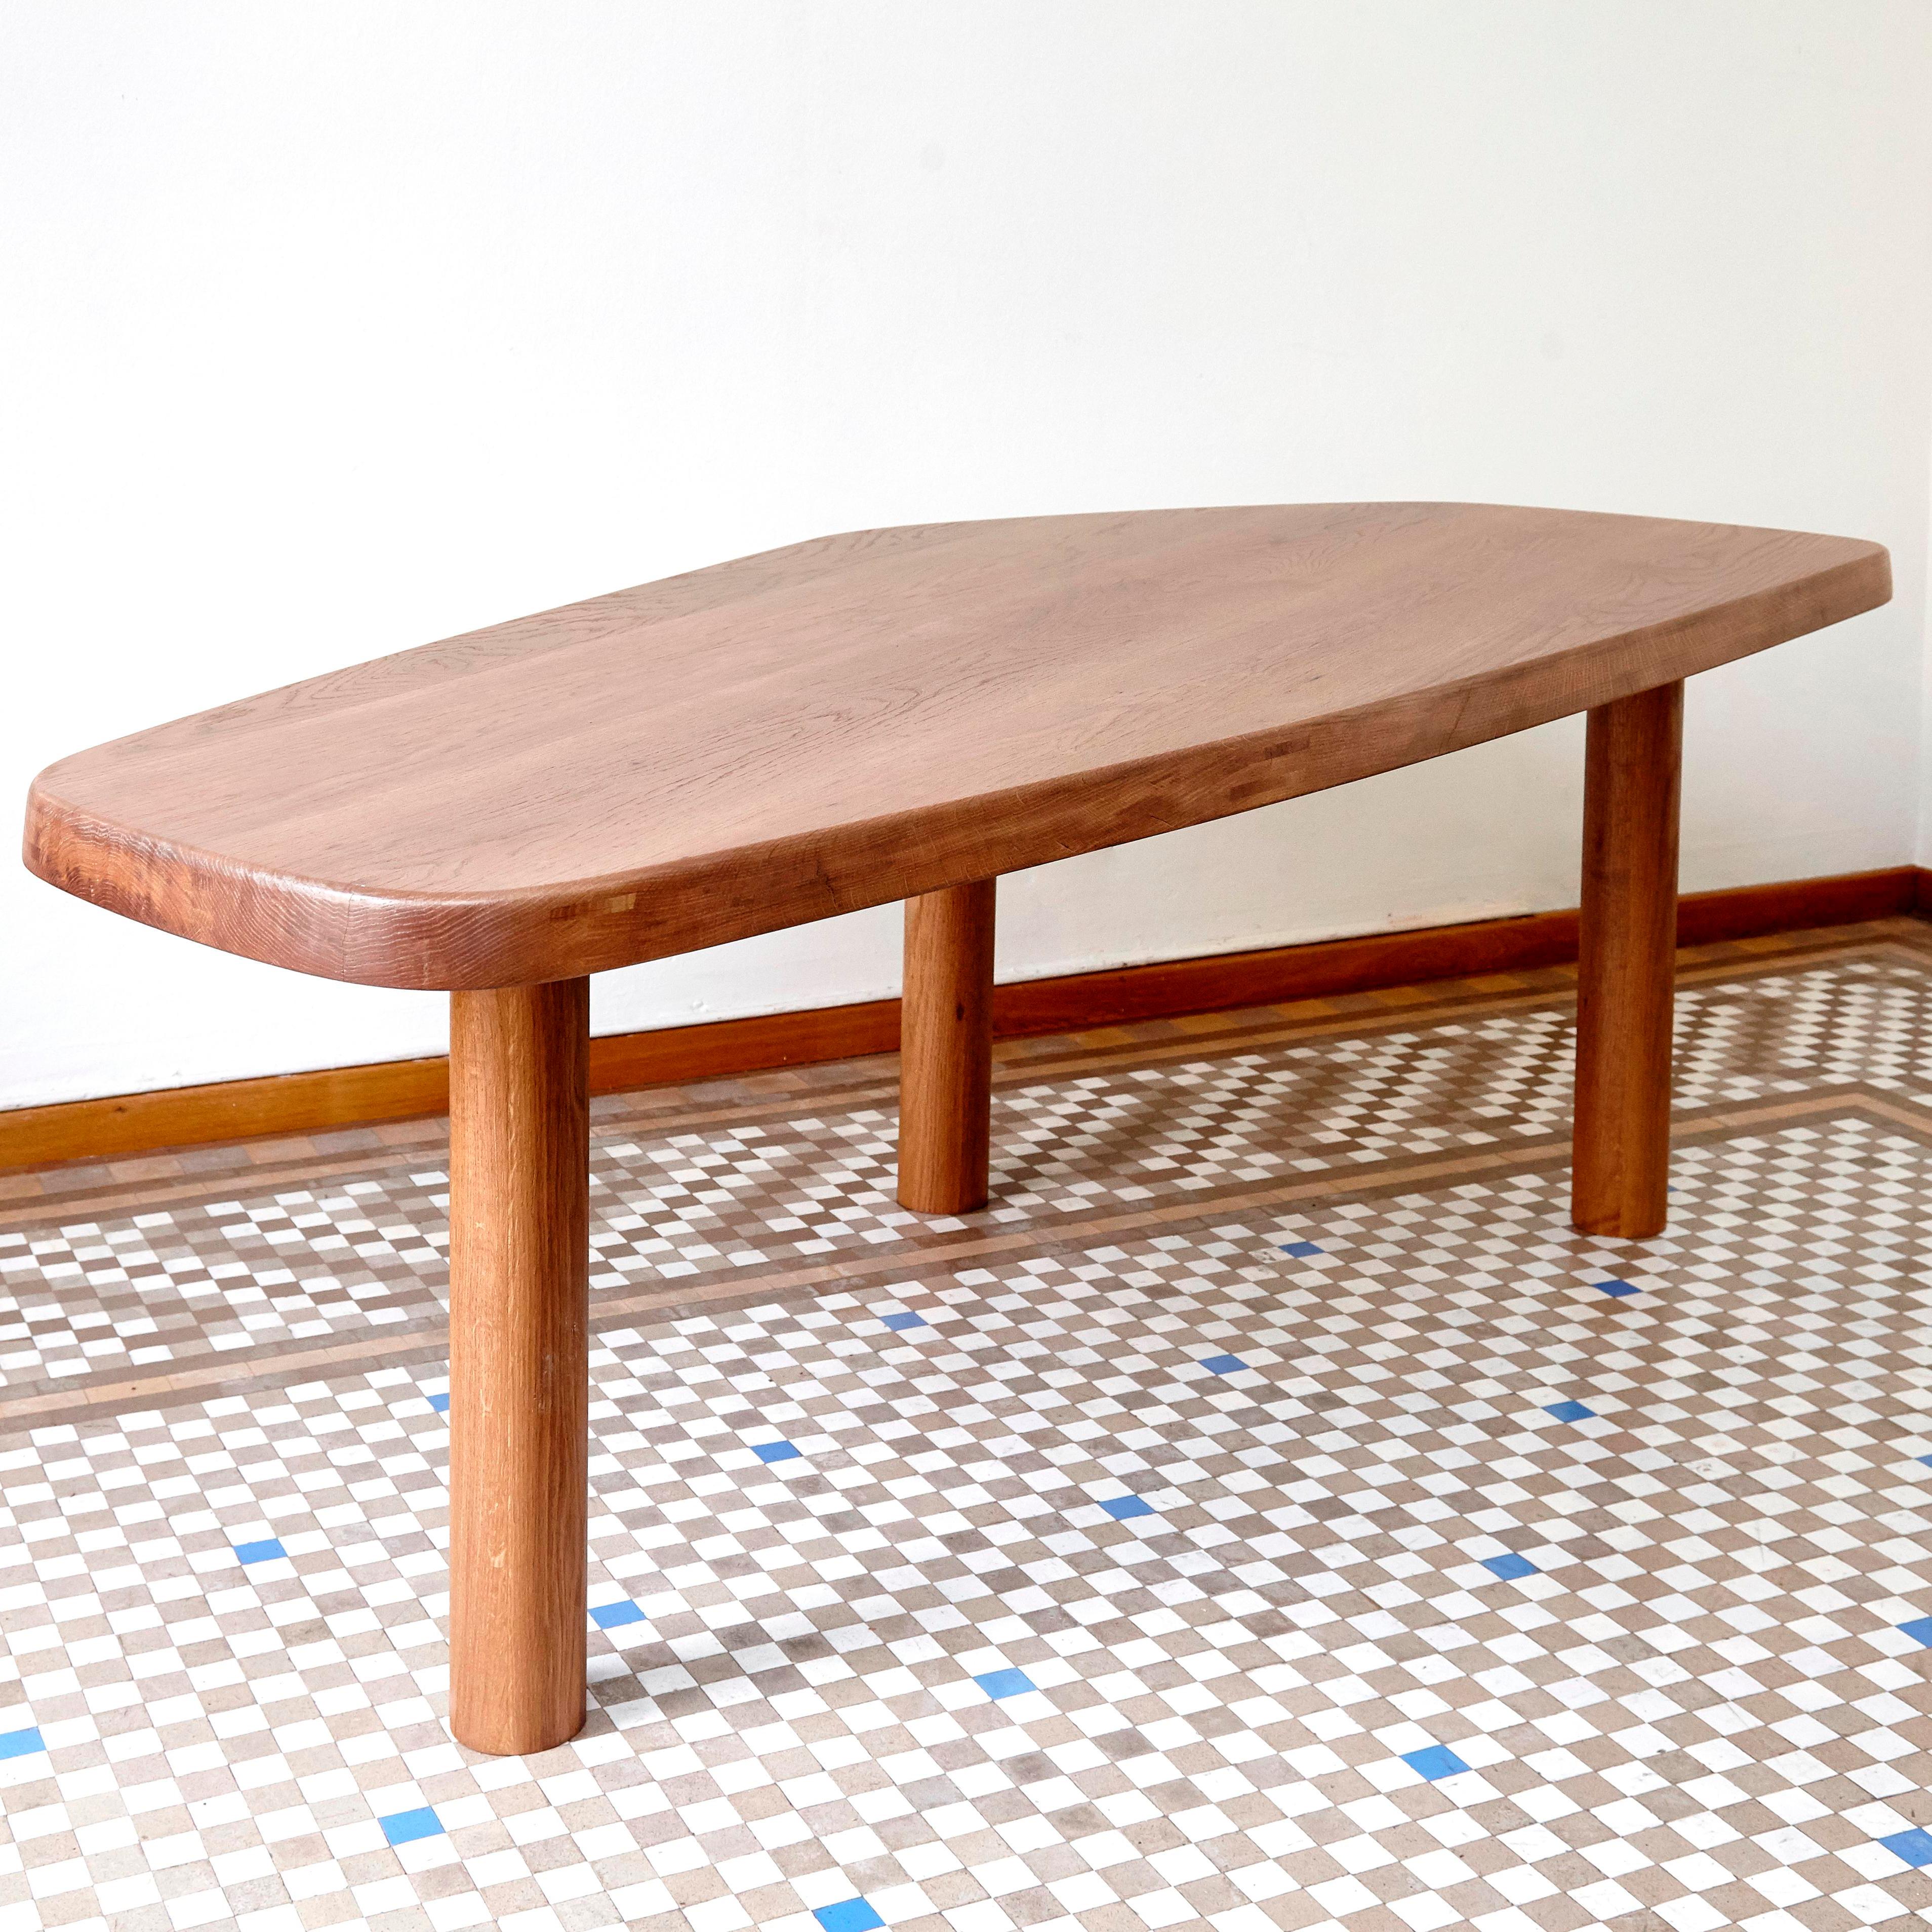 Large freeform dining table by dada - est. manufactured in Barcelona, 2017.

oakwood

Measures: 112.5 cm D x 220 cm W x 75 cm H 

Production delay: 7-8 weeks

There is the possibility of making it in different measures.


Dada Est. /